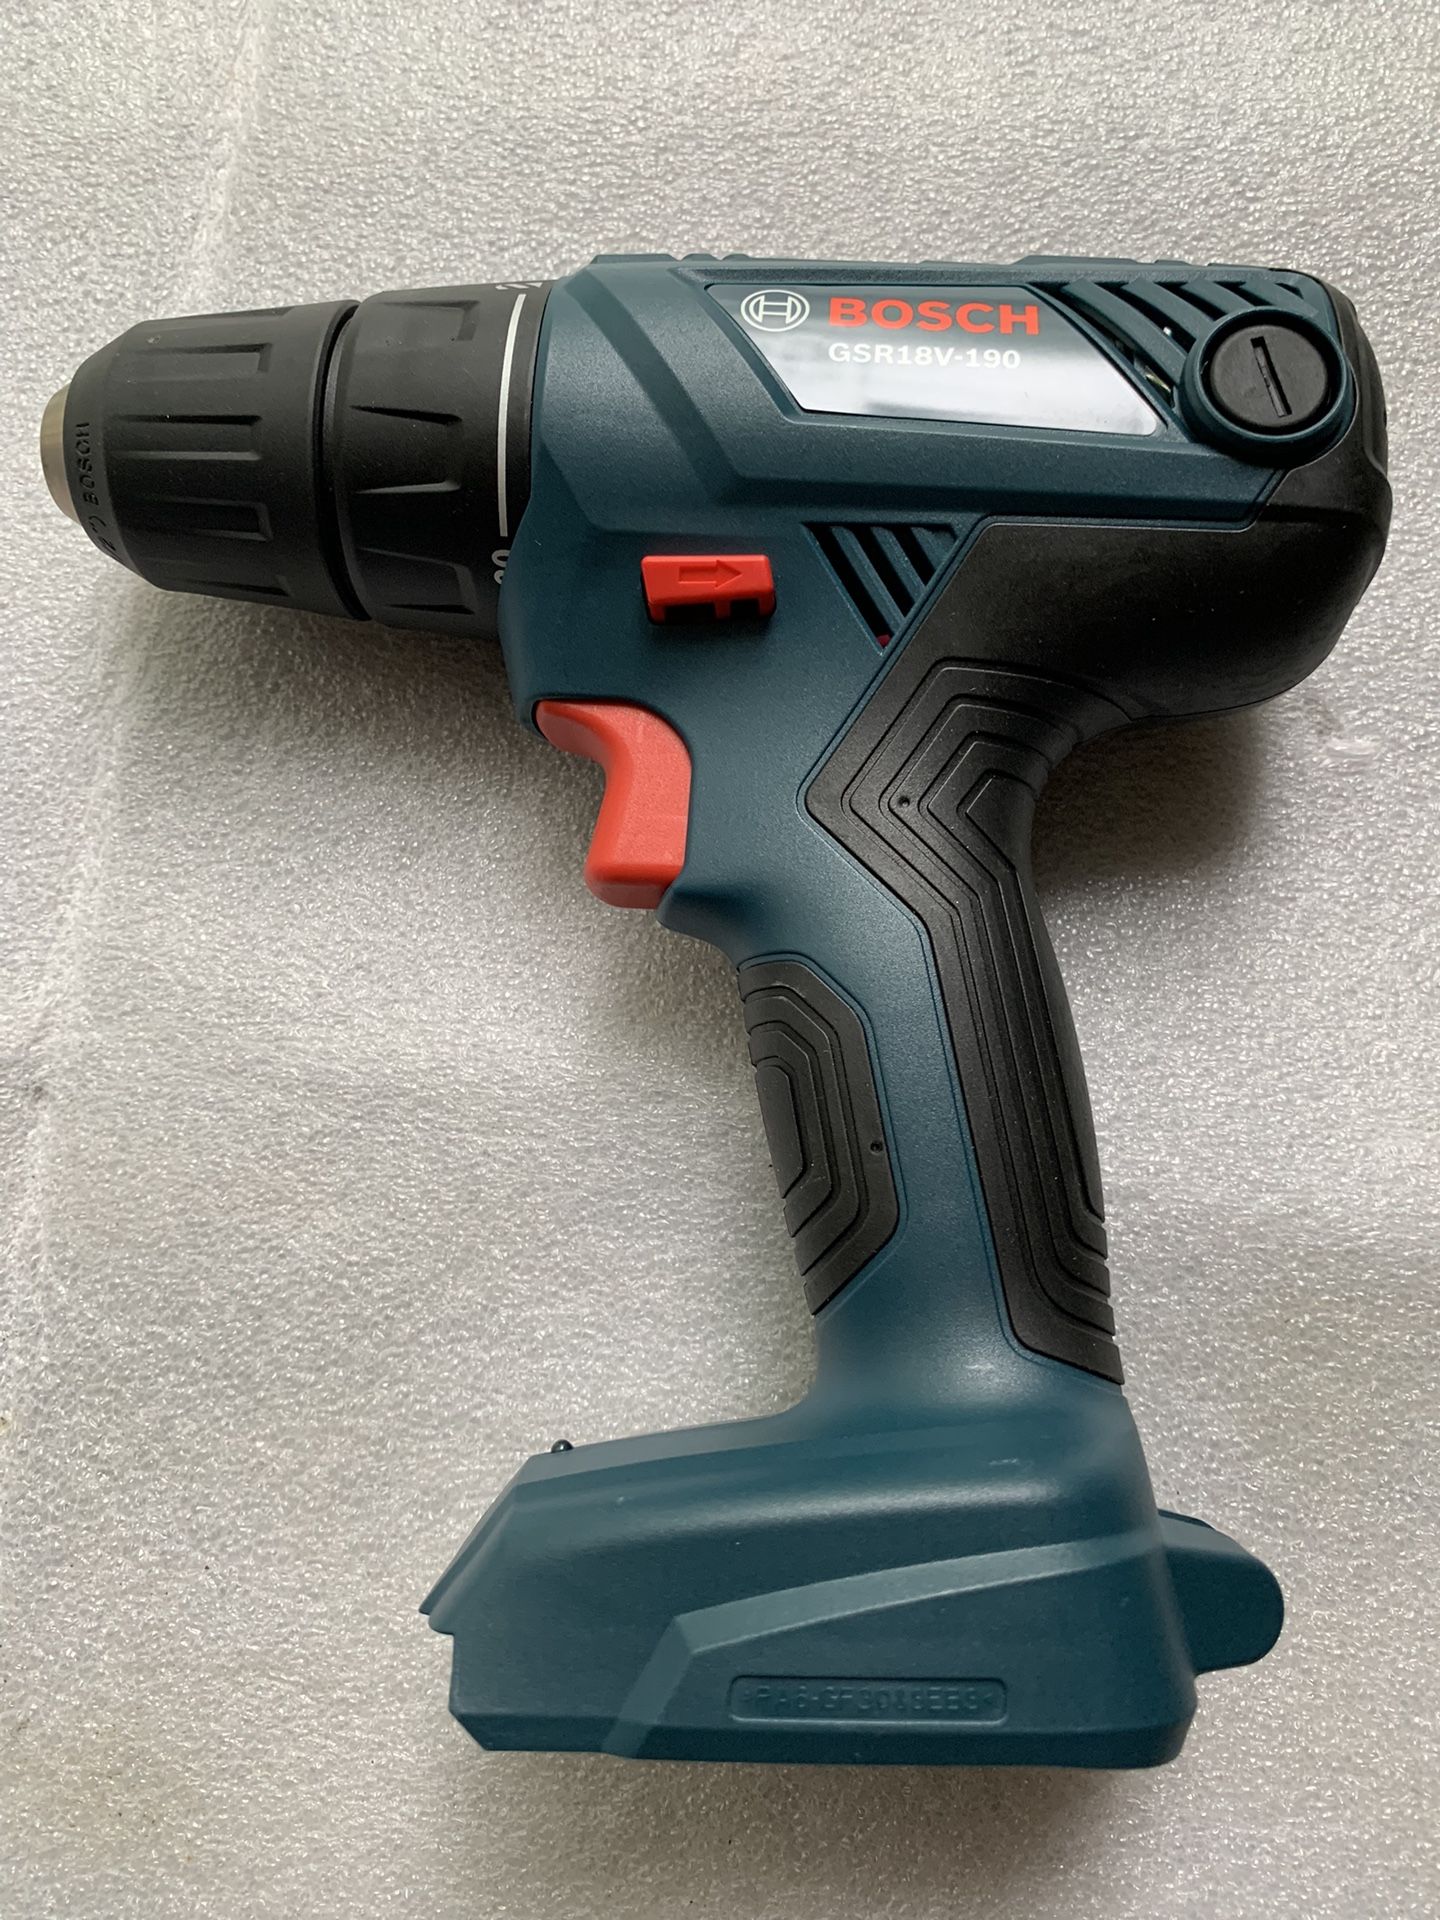 BOSCH GSR18V-190 18V Brushless Connected-Ready 1/2 In. Drill/Driver (Bare Tool)